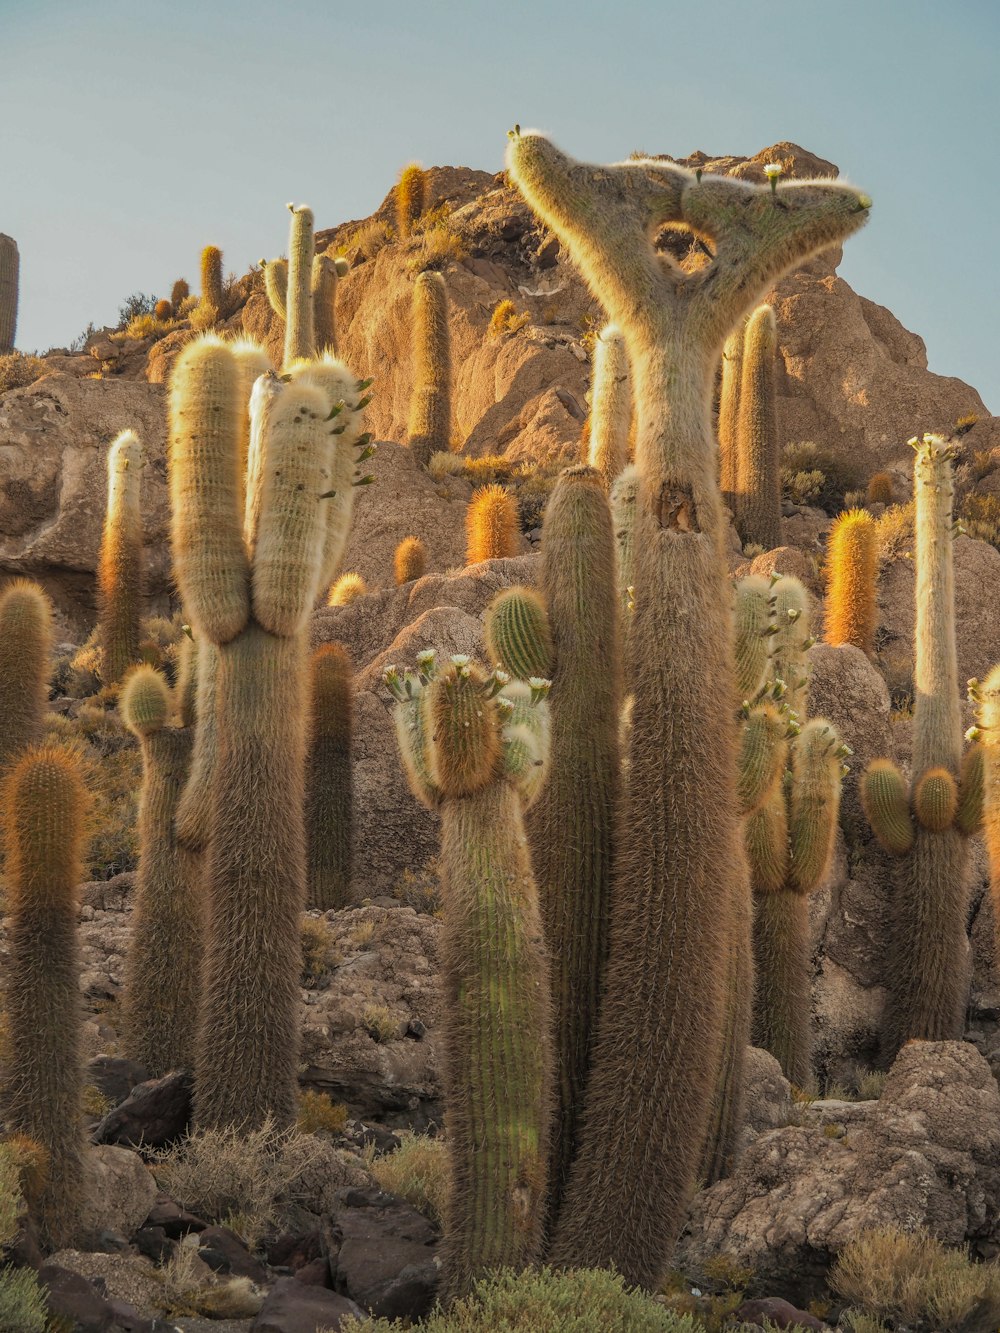 a large group of cactus plants in the desert